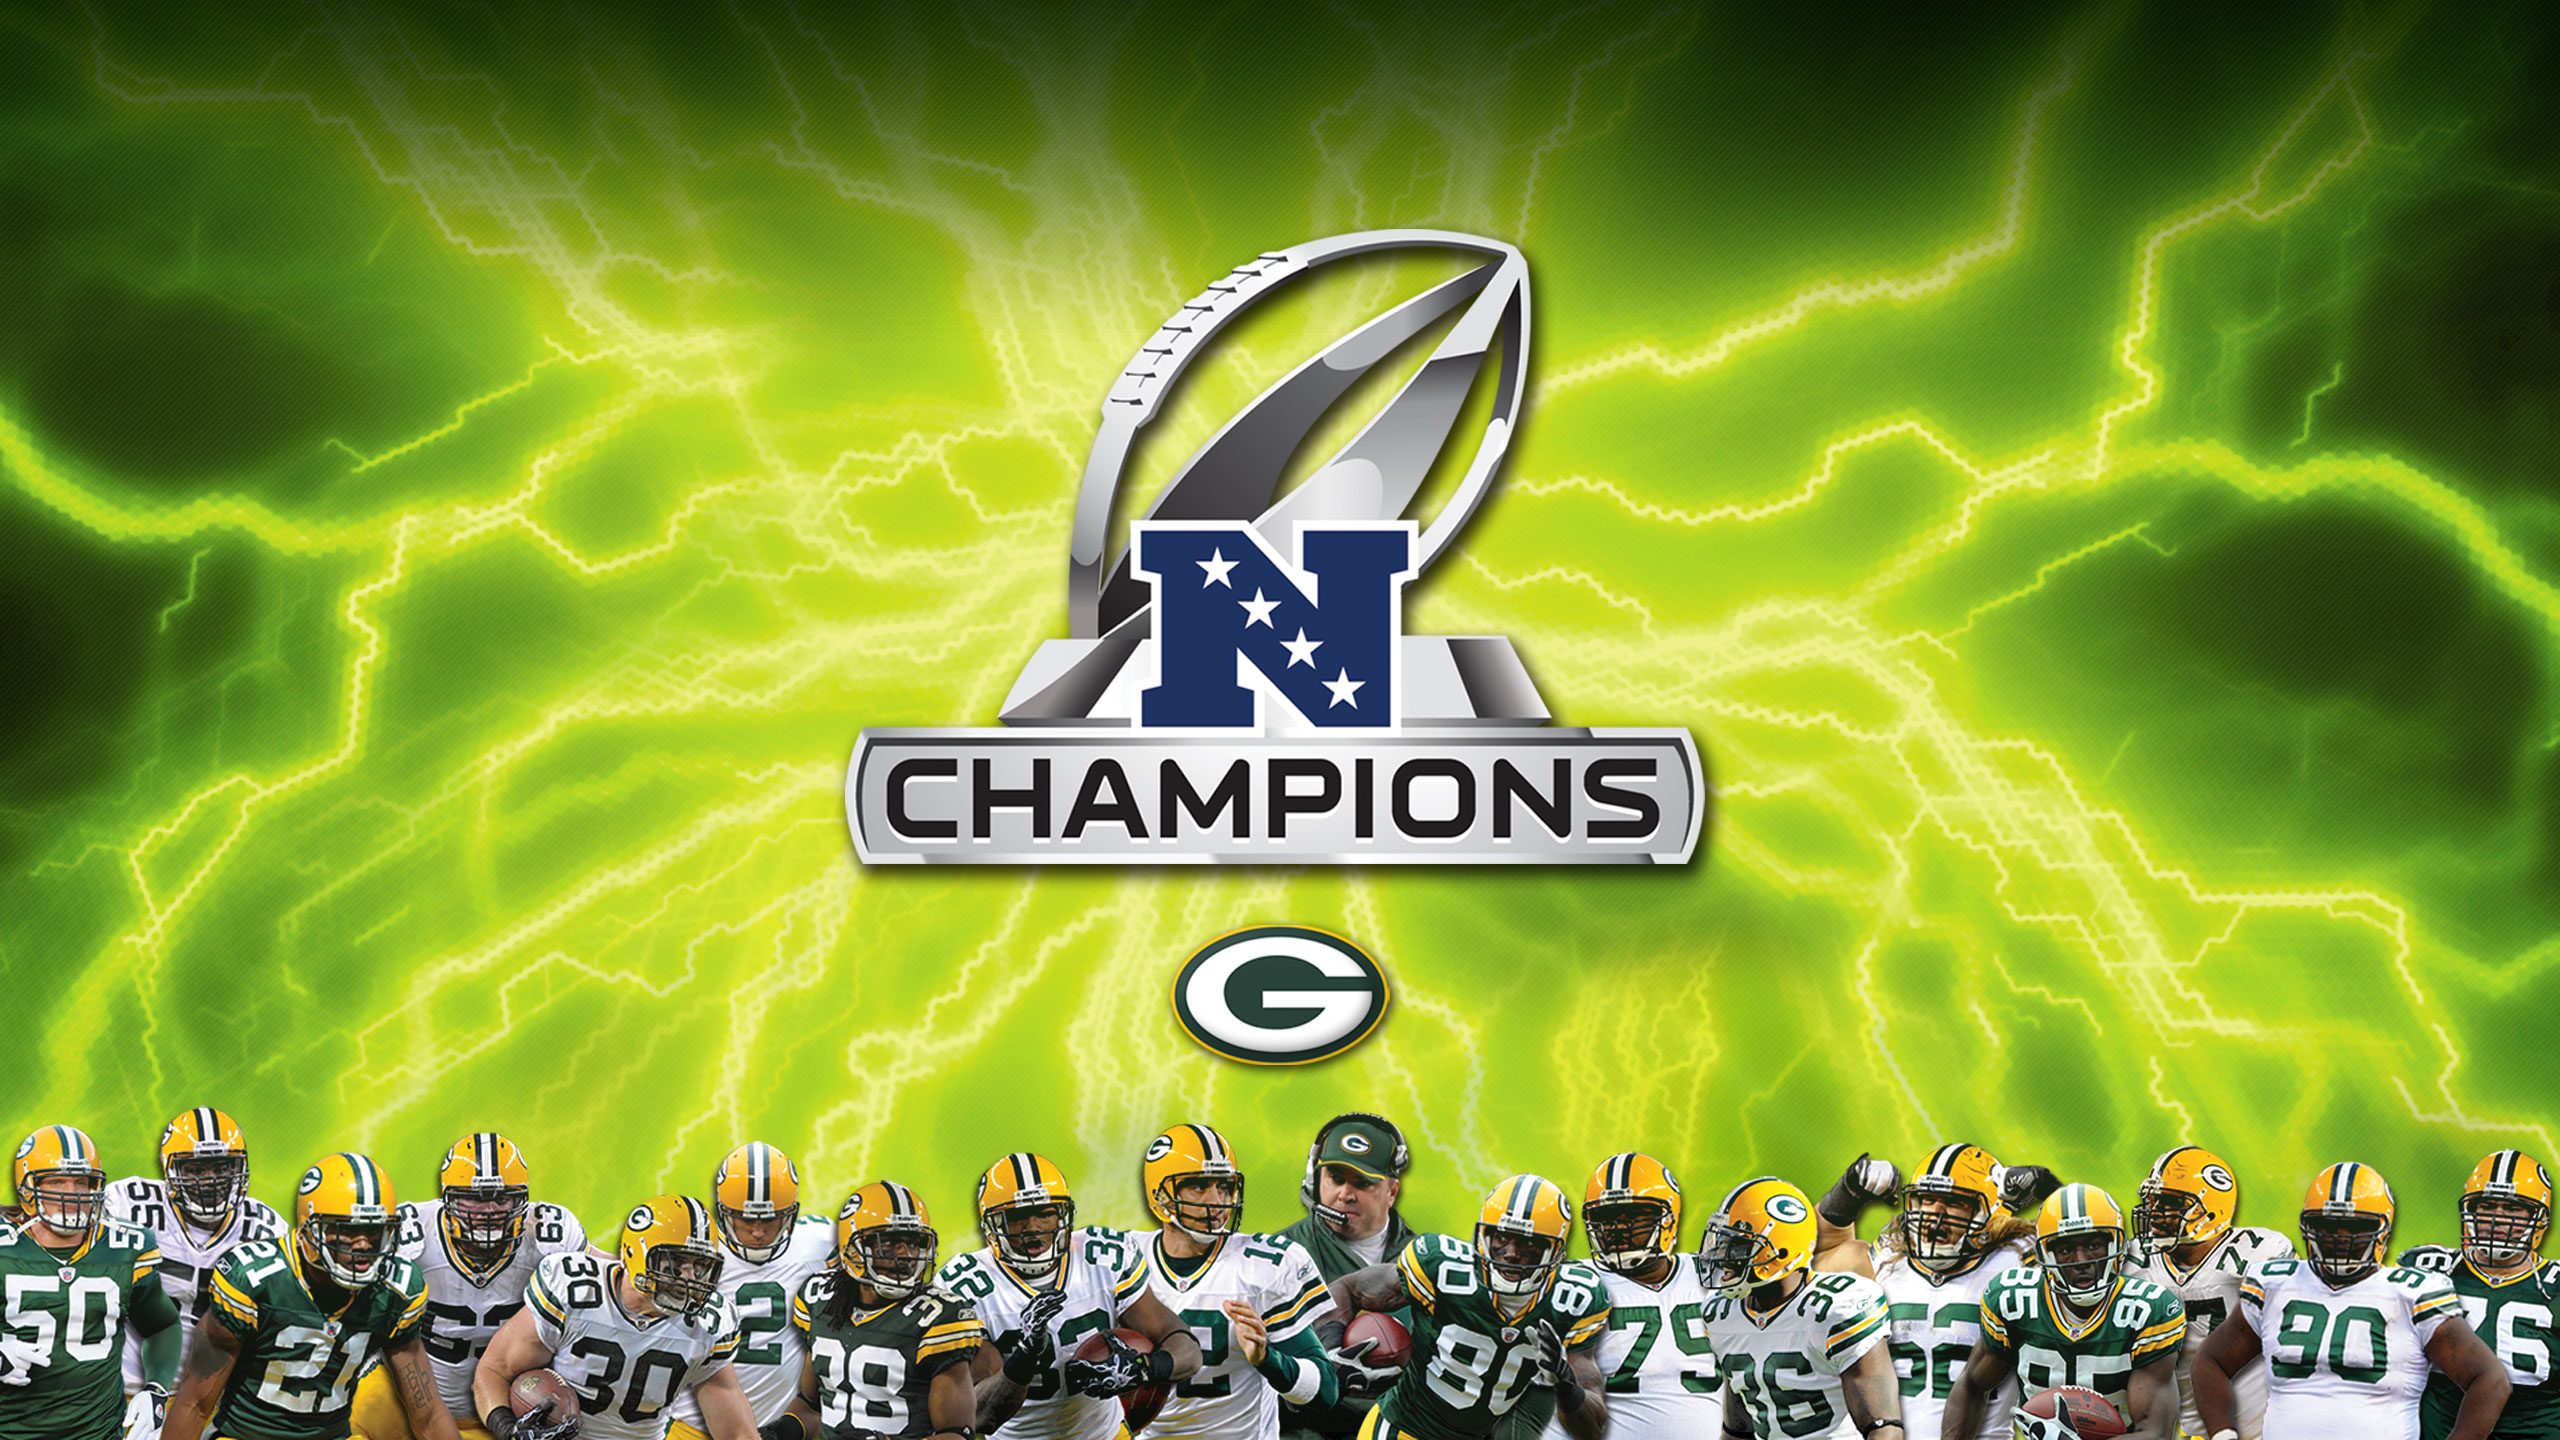 Free Super Bowl Champs Packers Wallpapers Free Super Bowl Champs